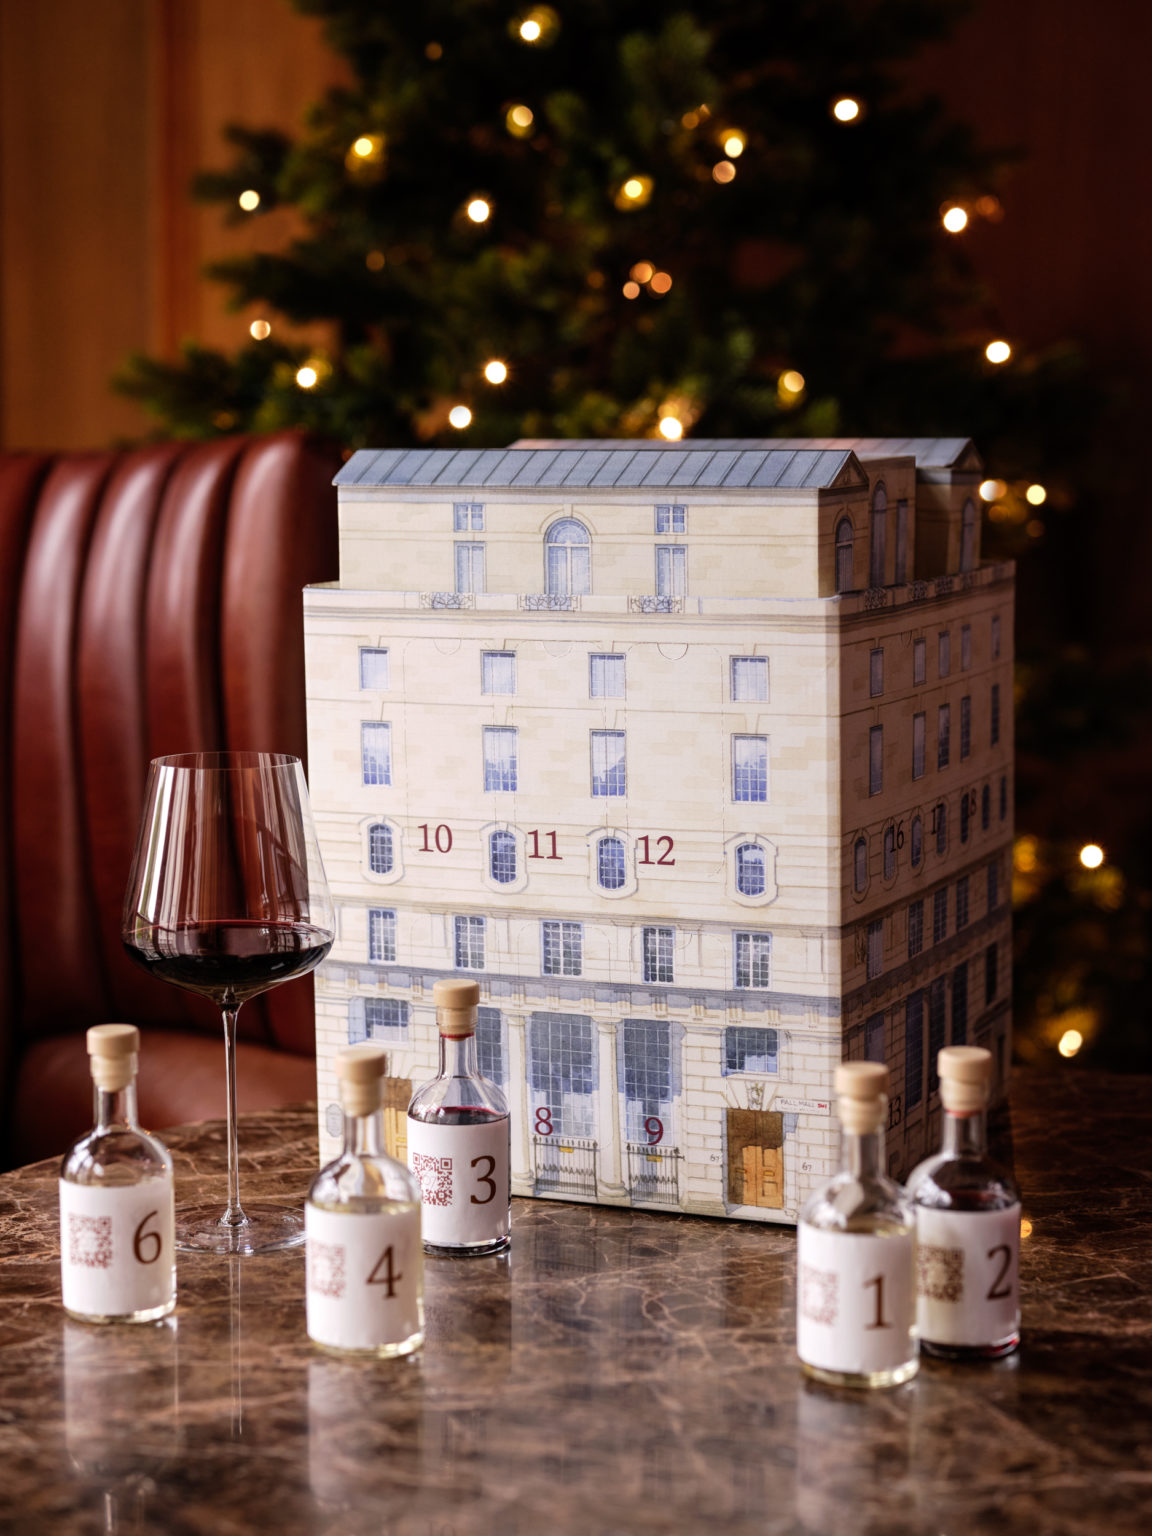 67 Pall Mall Sought-After Sommeliers’ 2021 Advent Calendar